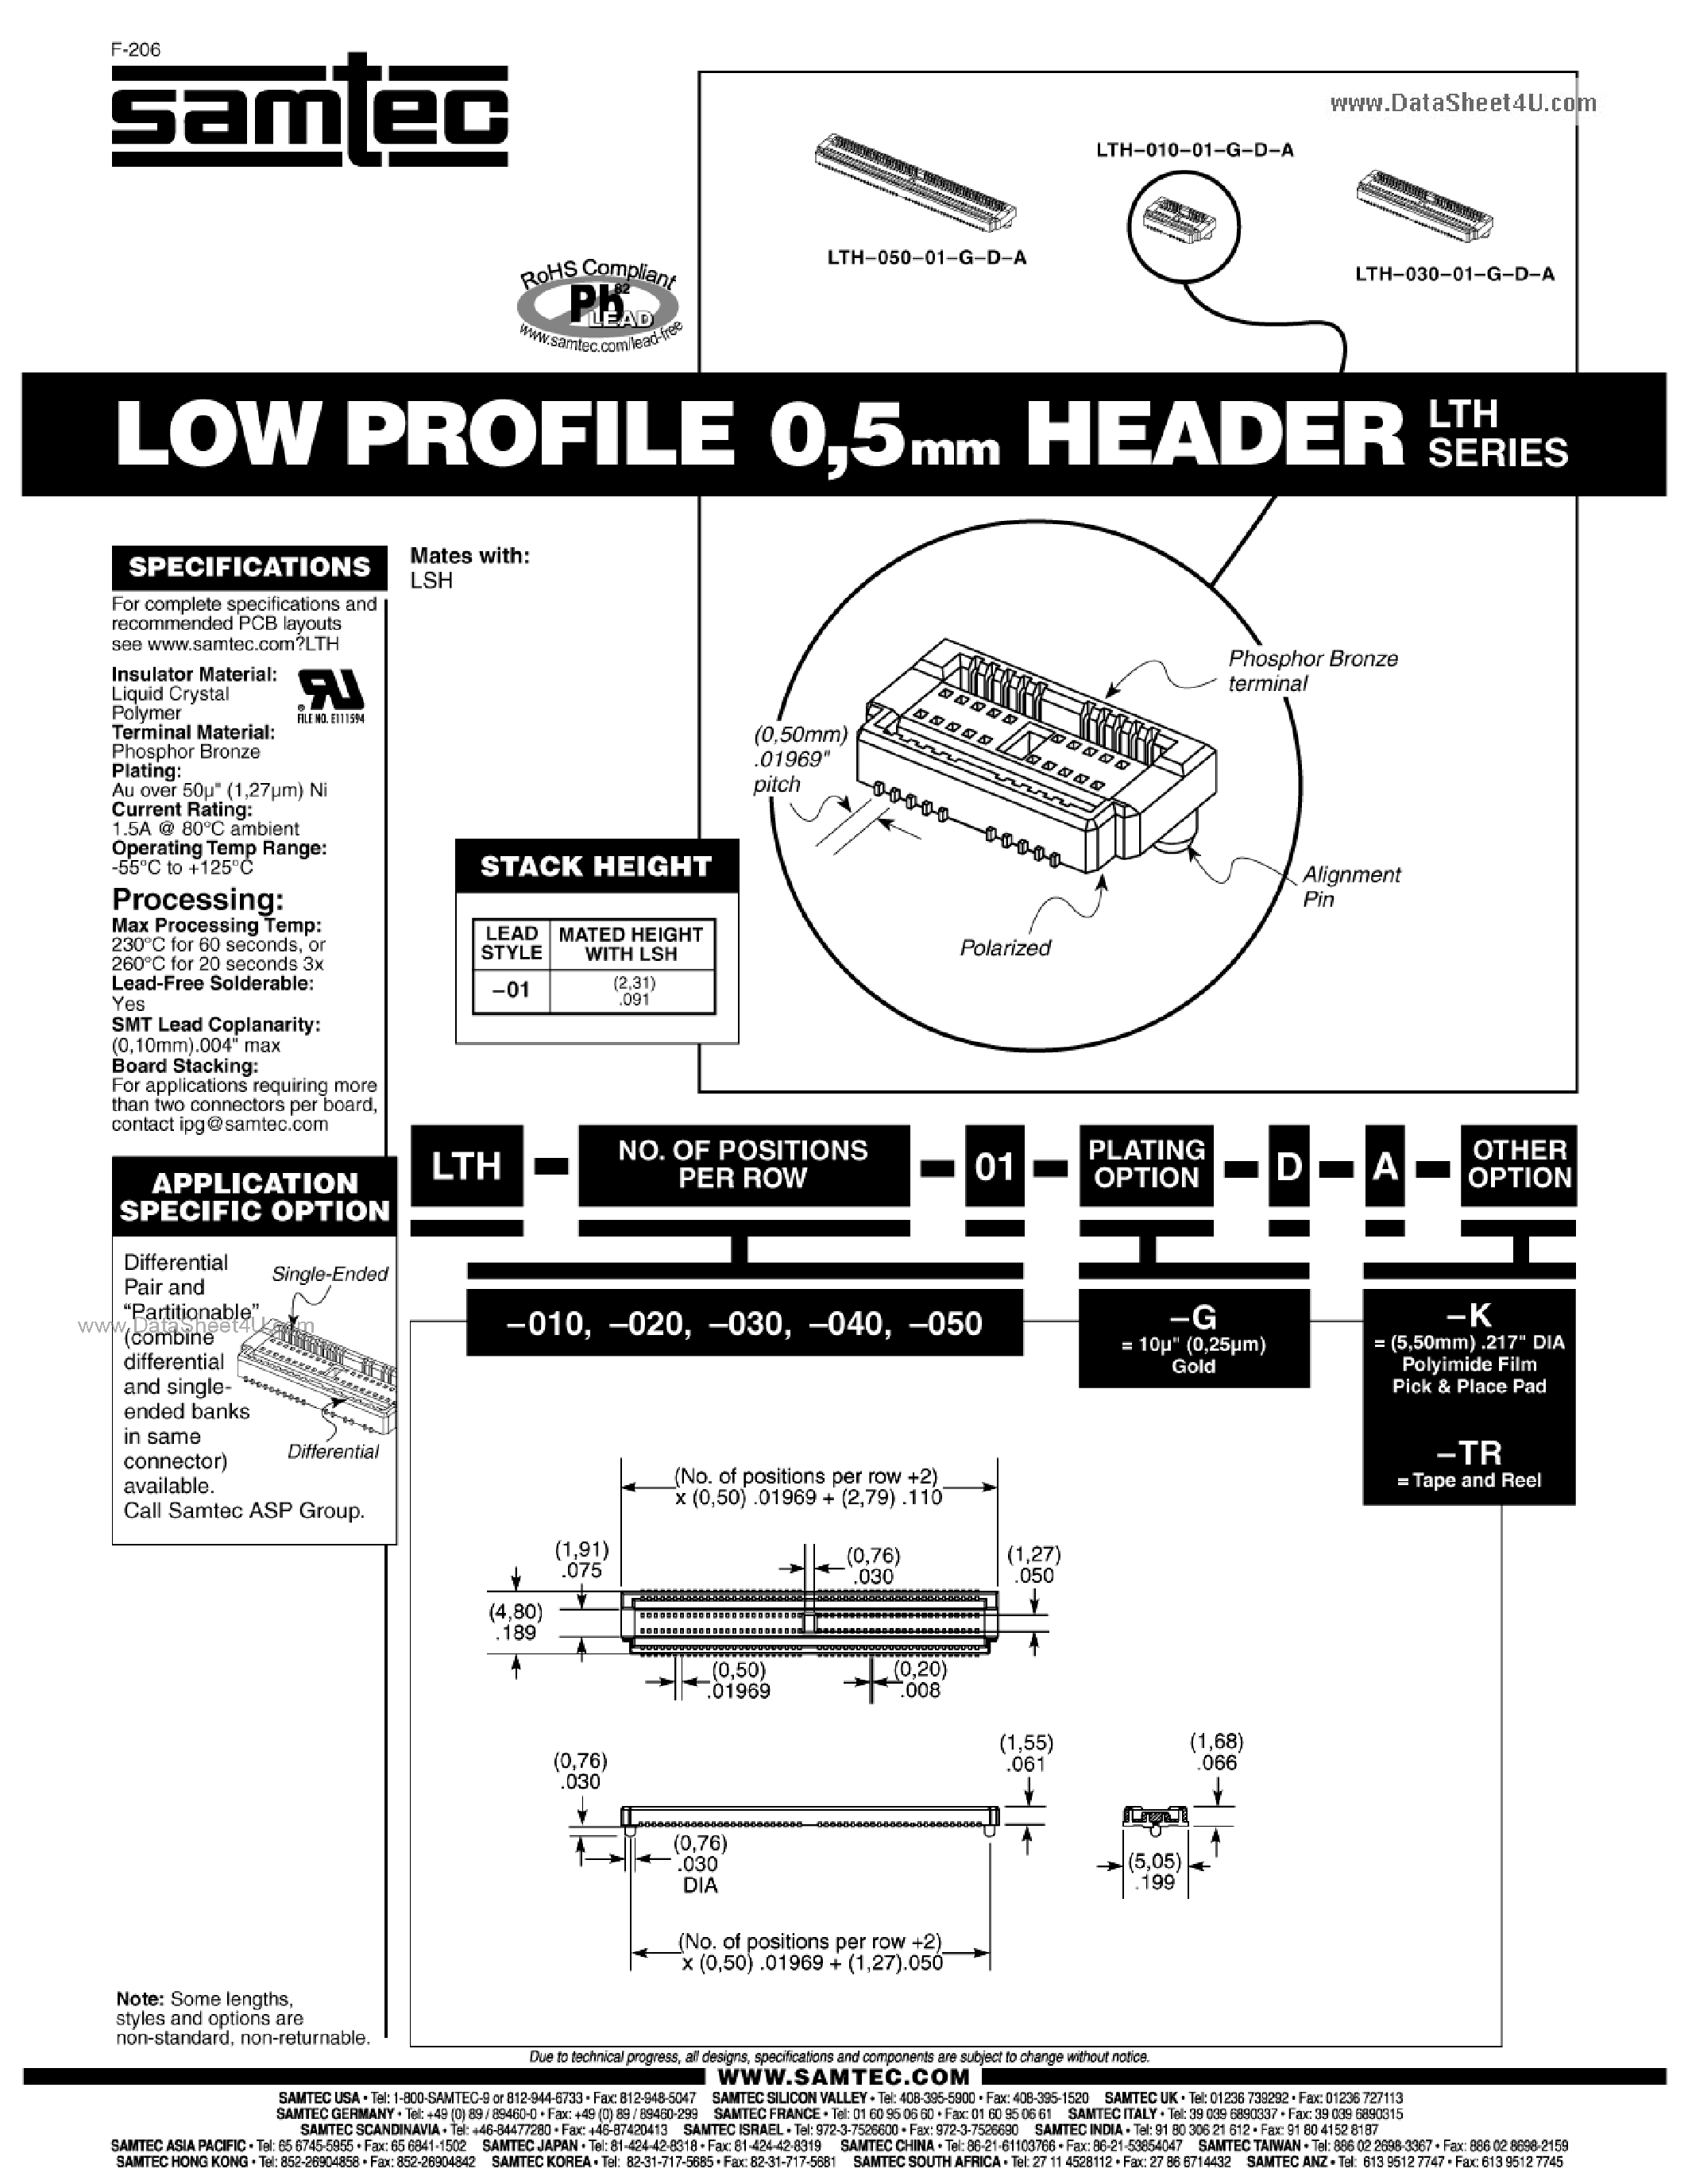 Datasheet LTH-010-01-G-D-A - Connector page 1